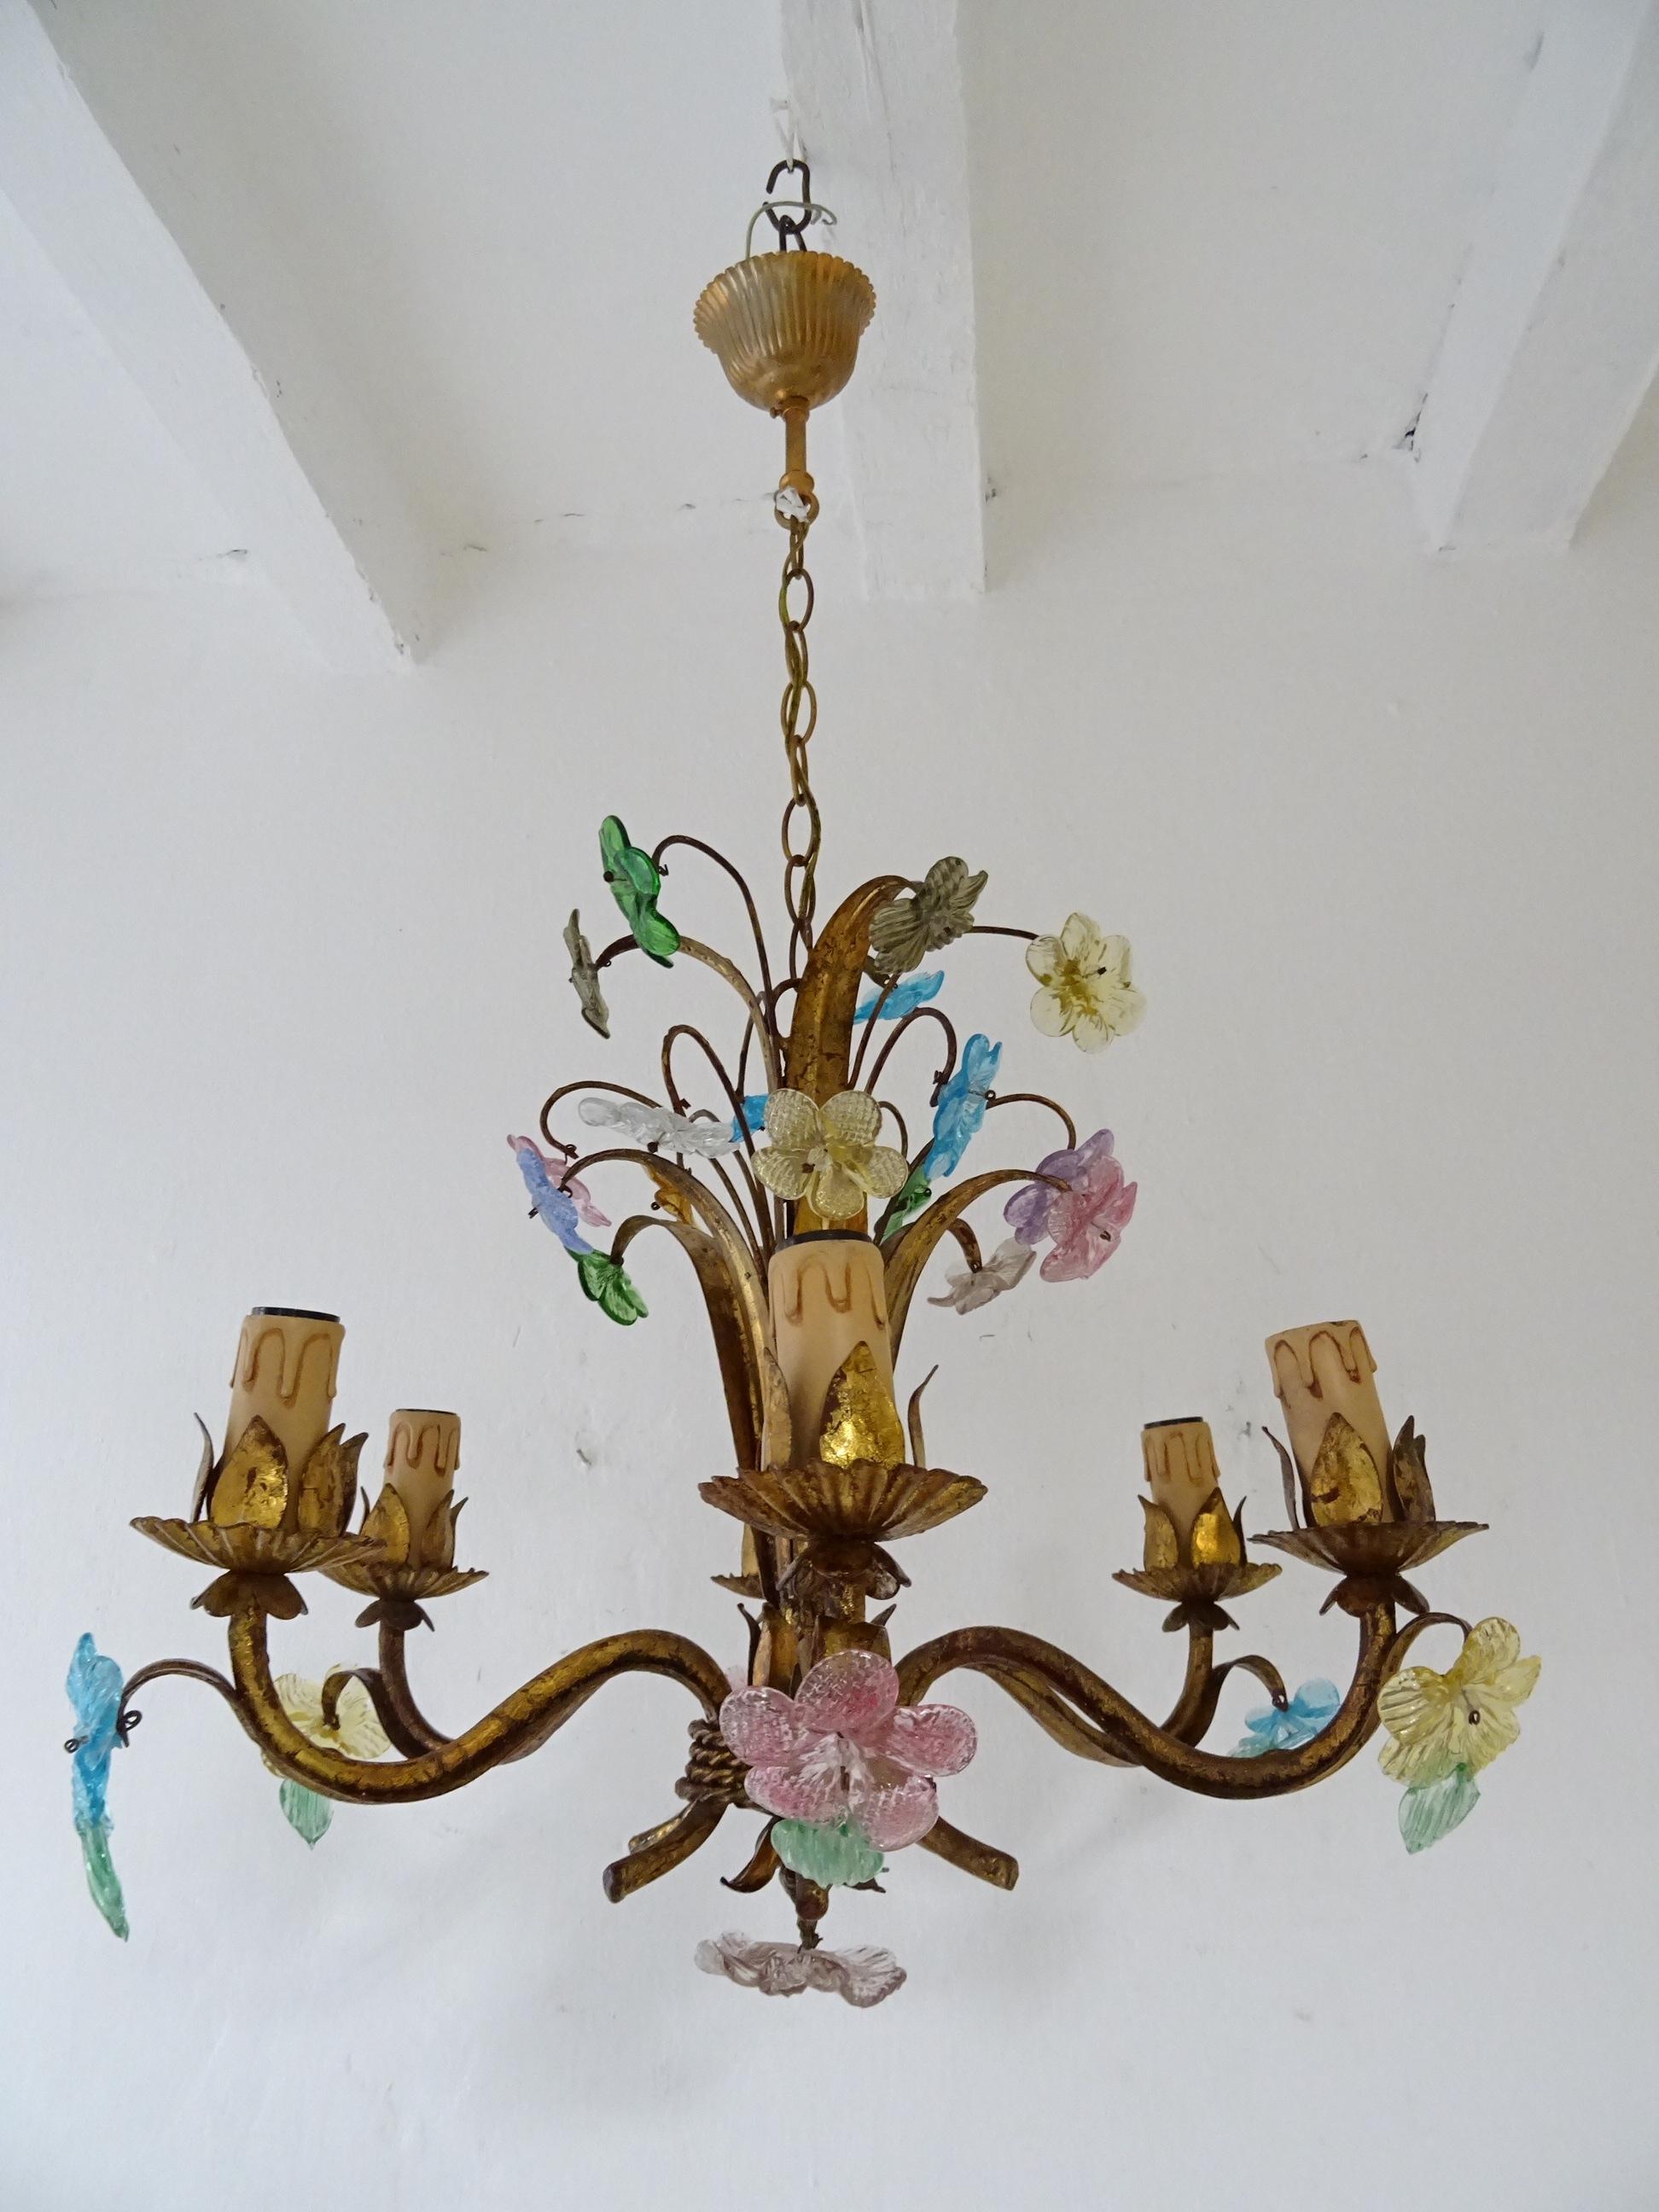 Housing 6-lights. Will be rewired with appropriate sockets for country and ready to hang. (for USA, we install UL US certified sockets) Chippy Gilt tole with Murano glass flowers in big and small. Adding 12 inches of original chain and canopy.